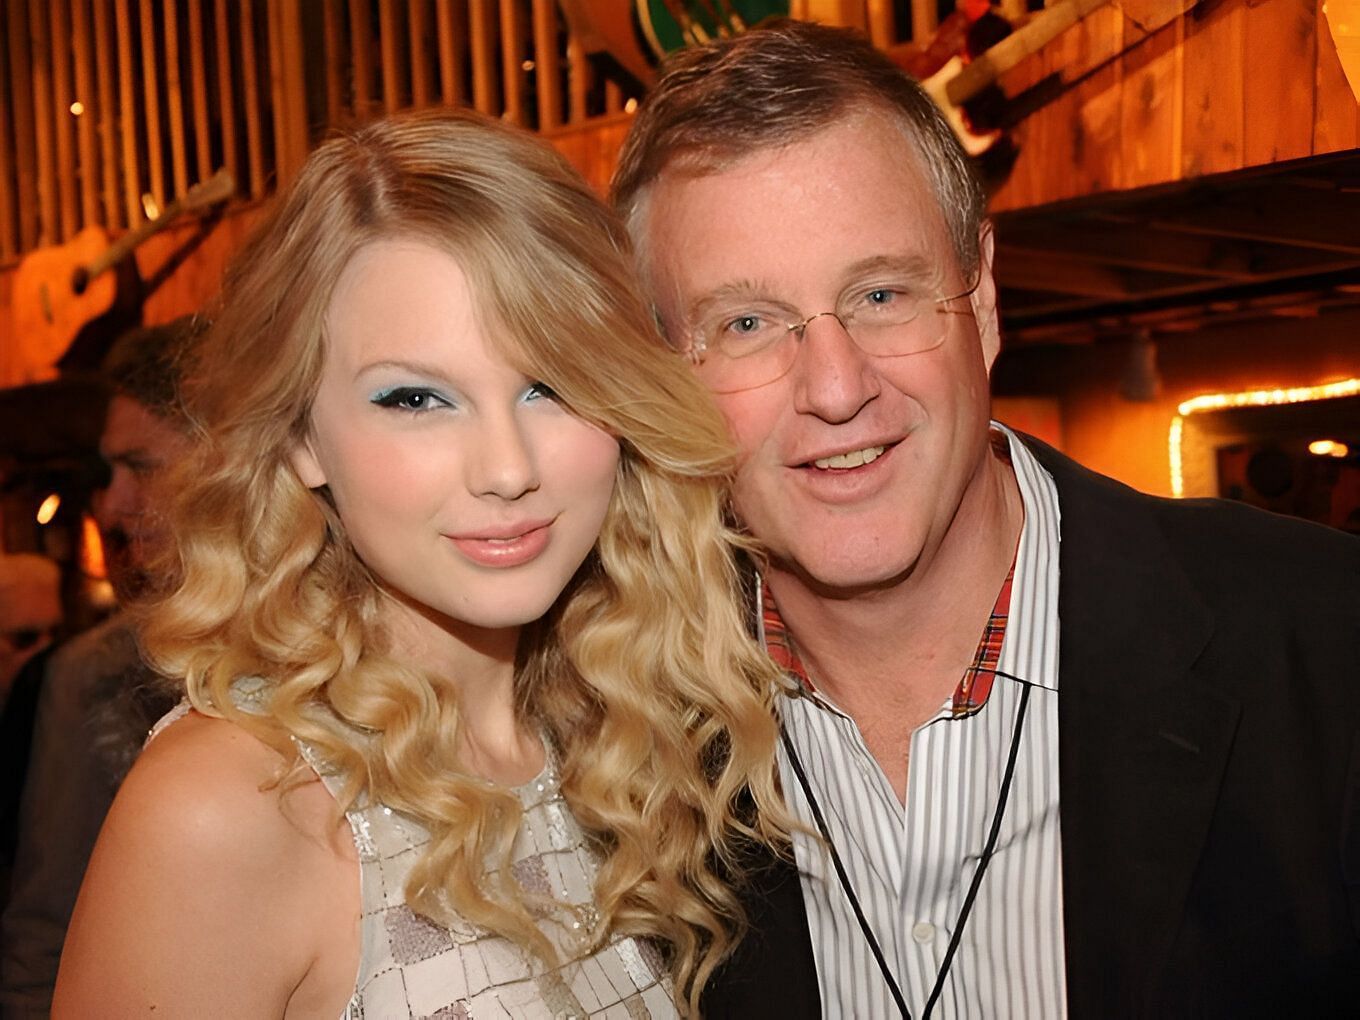 Scott Swifts Net Worth Explored As Leaked Email To Taylor Swifts Old